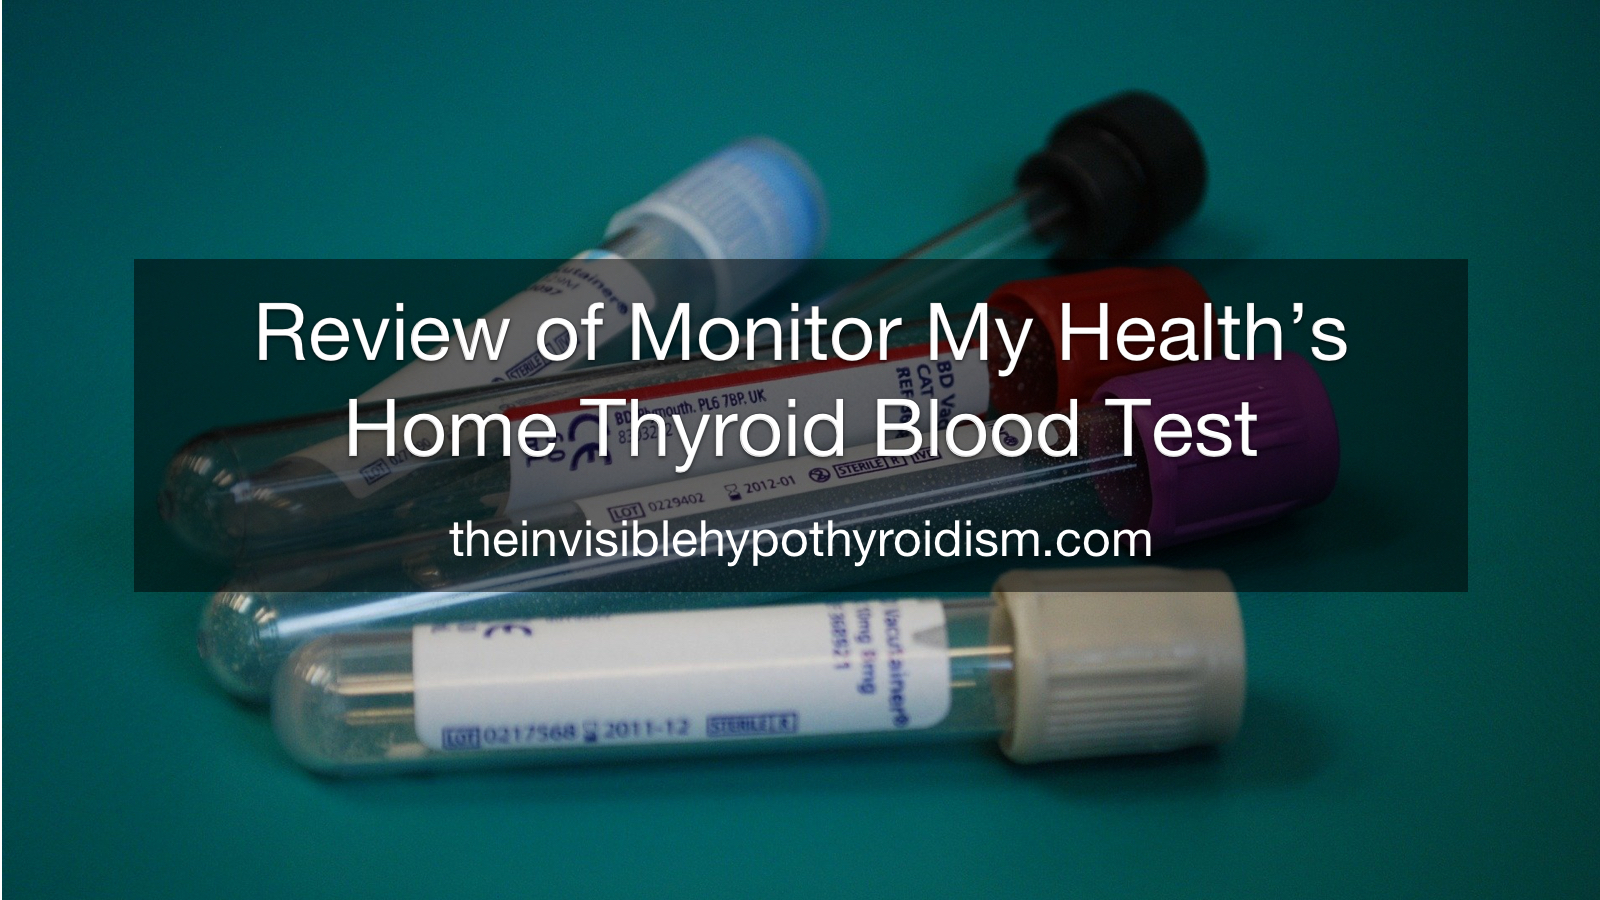 Review of Monitor My Health’s Home Thyroid Blood Test